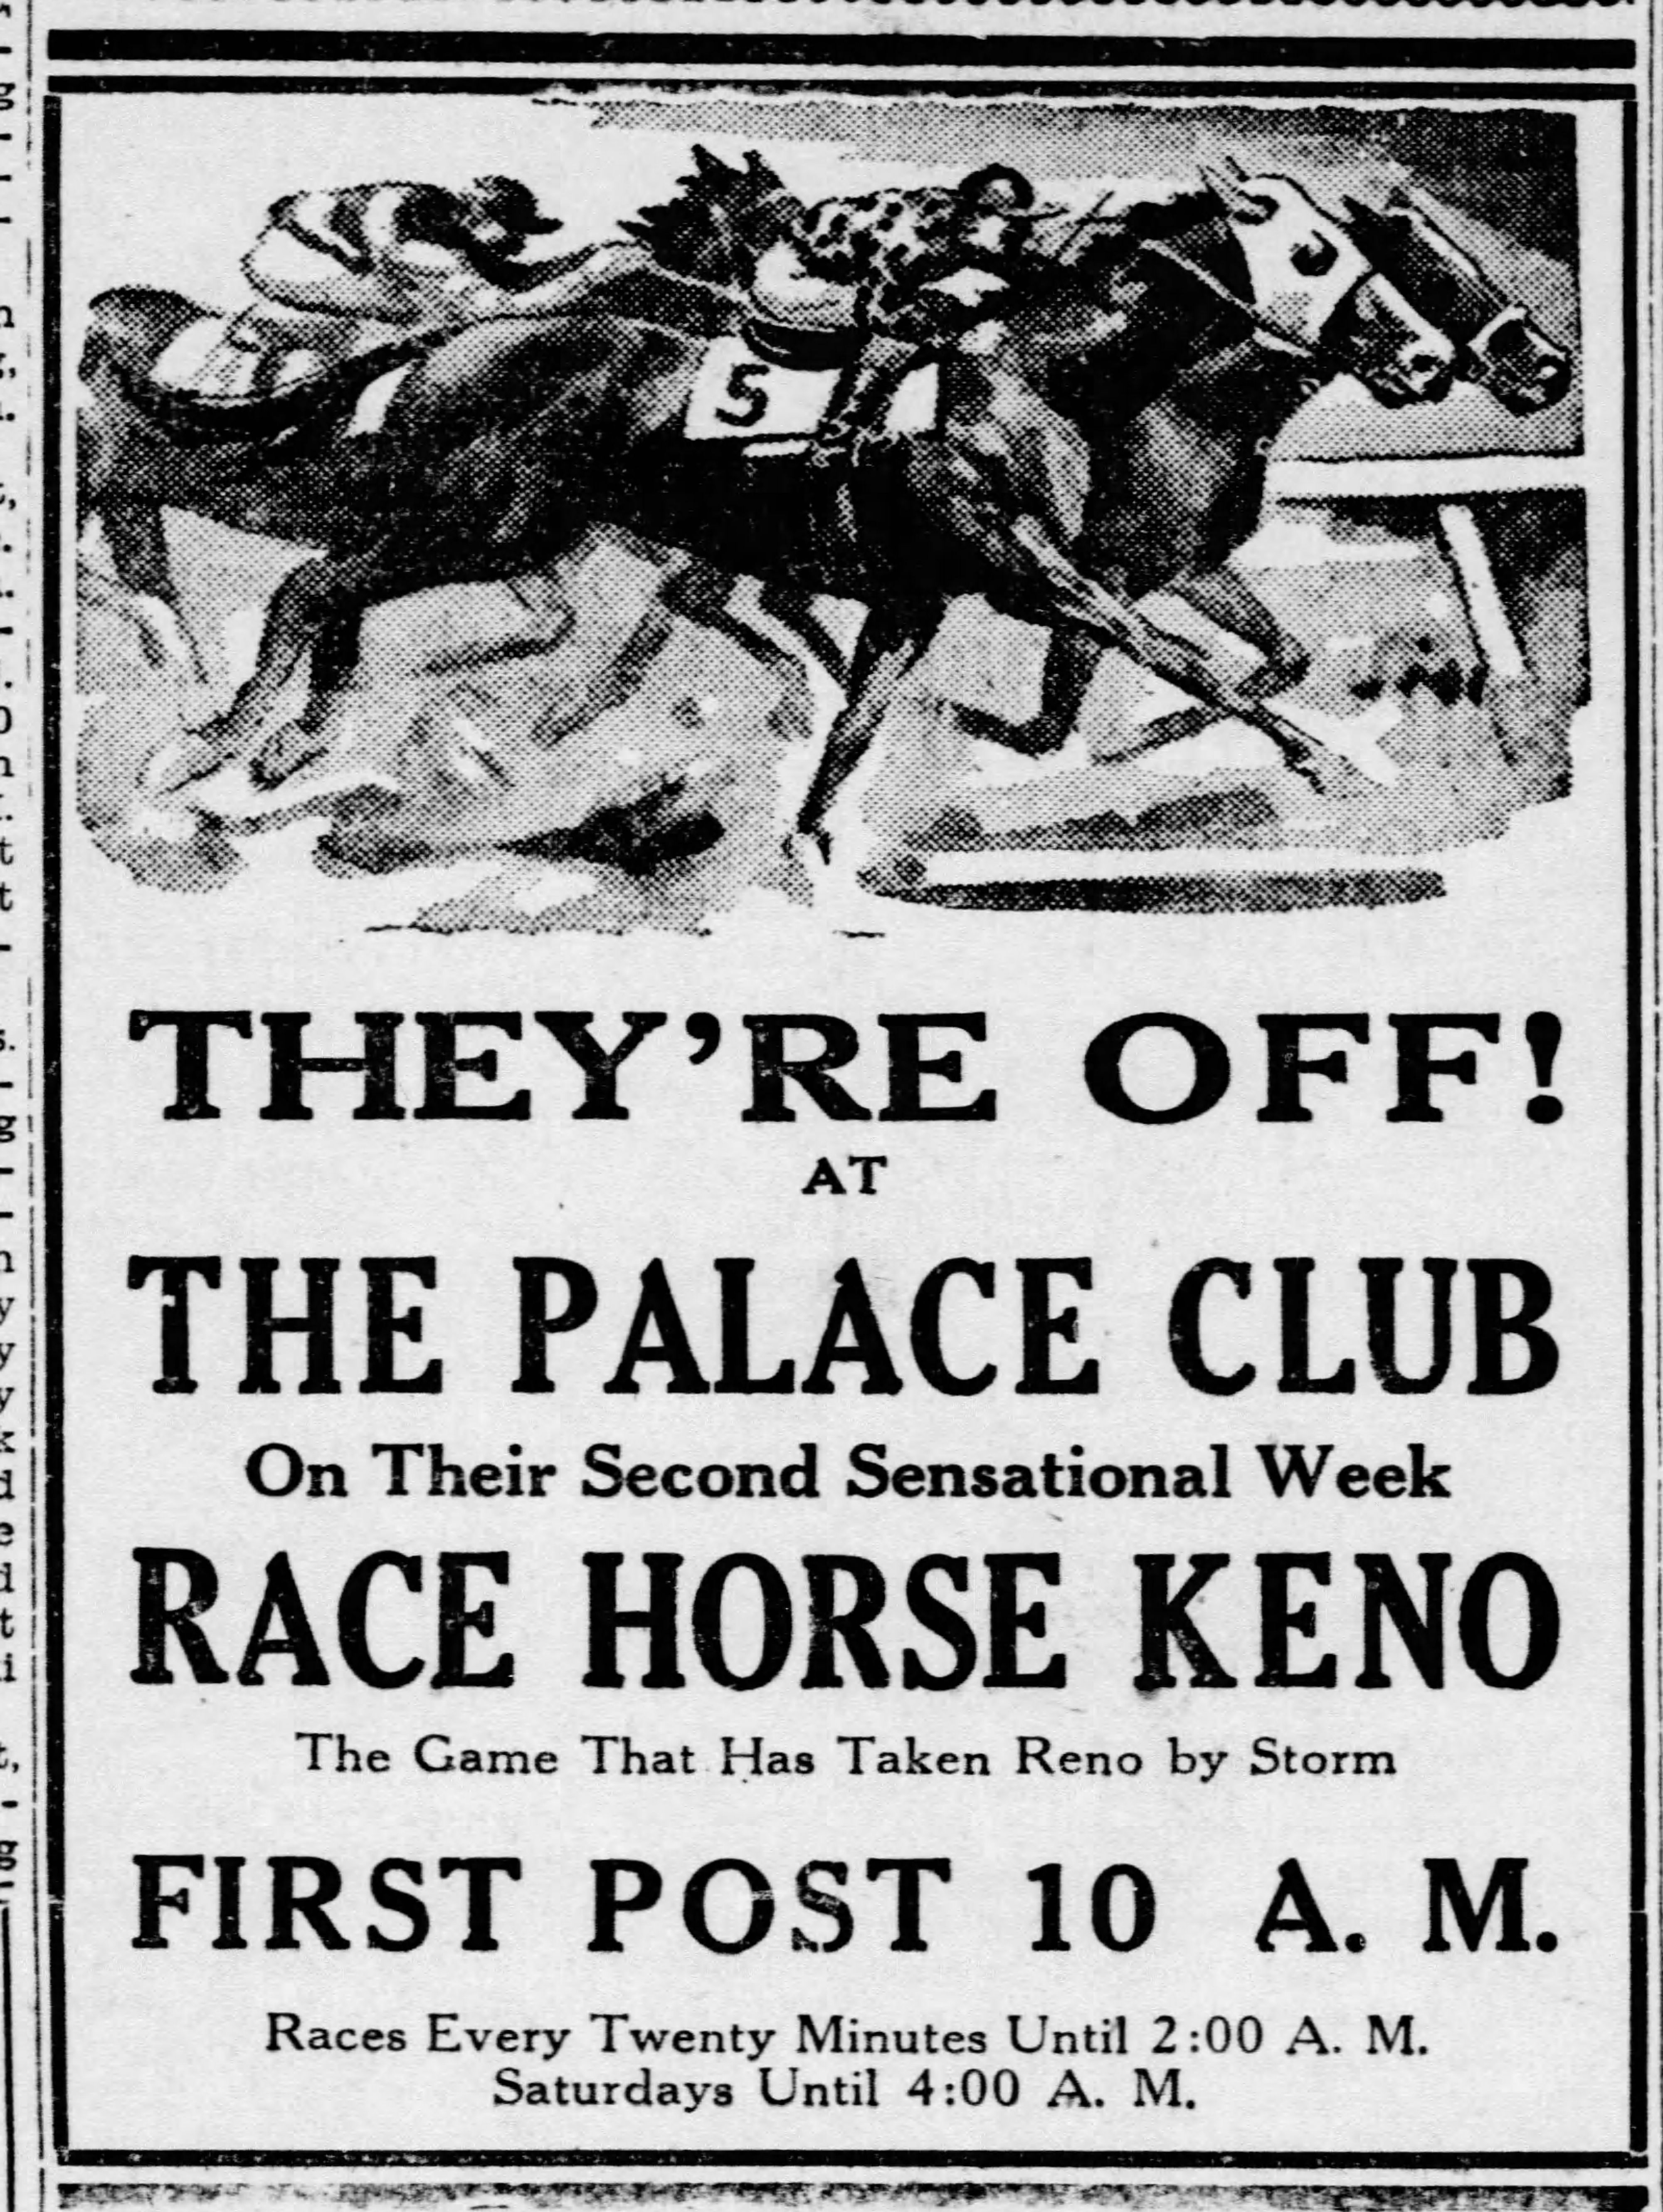 A newspaper advertisement: 'They're off! at The Palace Club on their second sensational week: race horse keno, the game that has taken Reno by storm. First post 10 A.M., races every twenty minutes until 2:00 A.M., Saturdays until 4:00 A. M.'